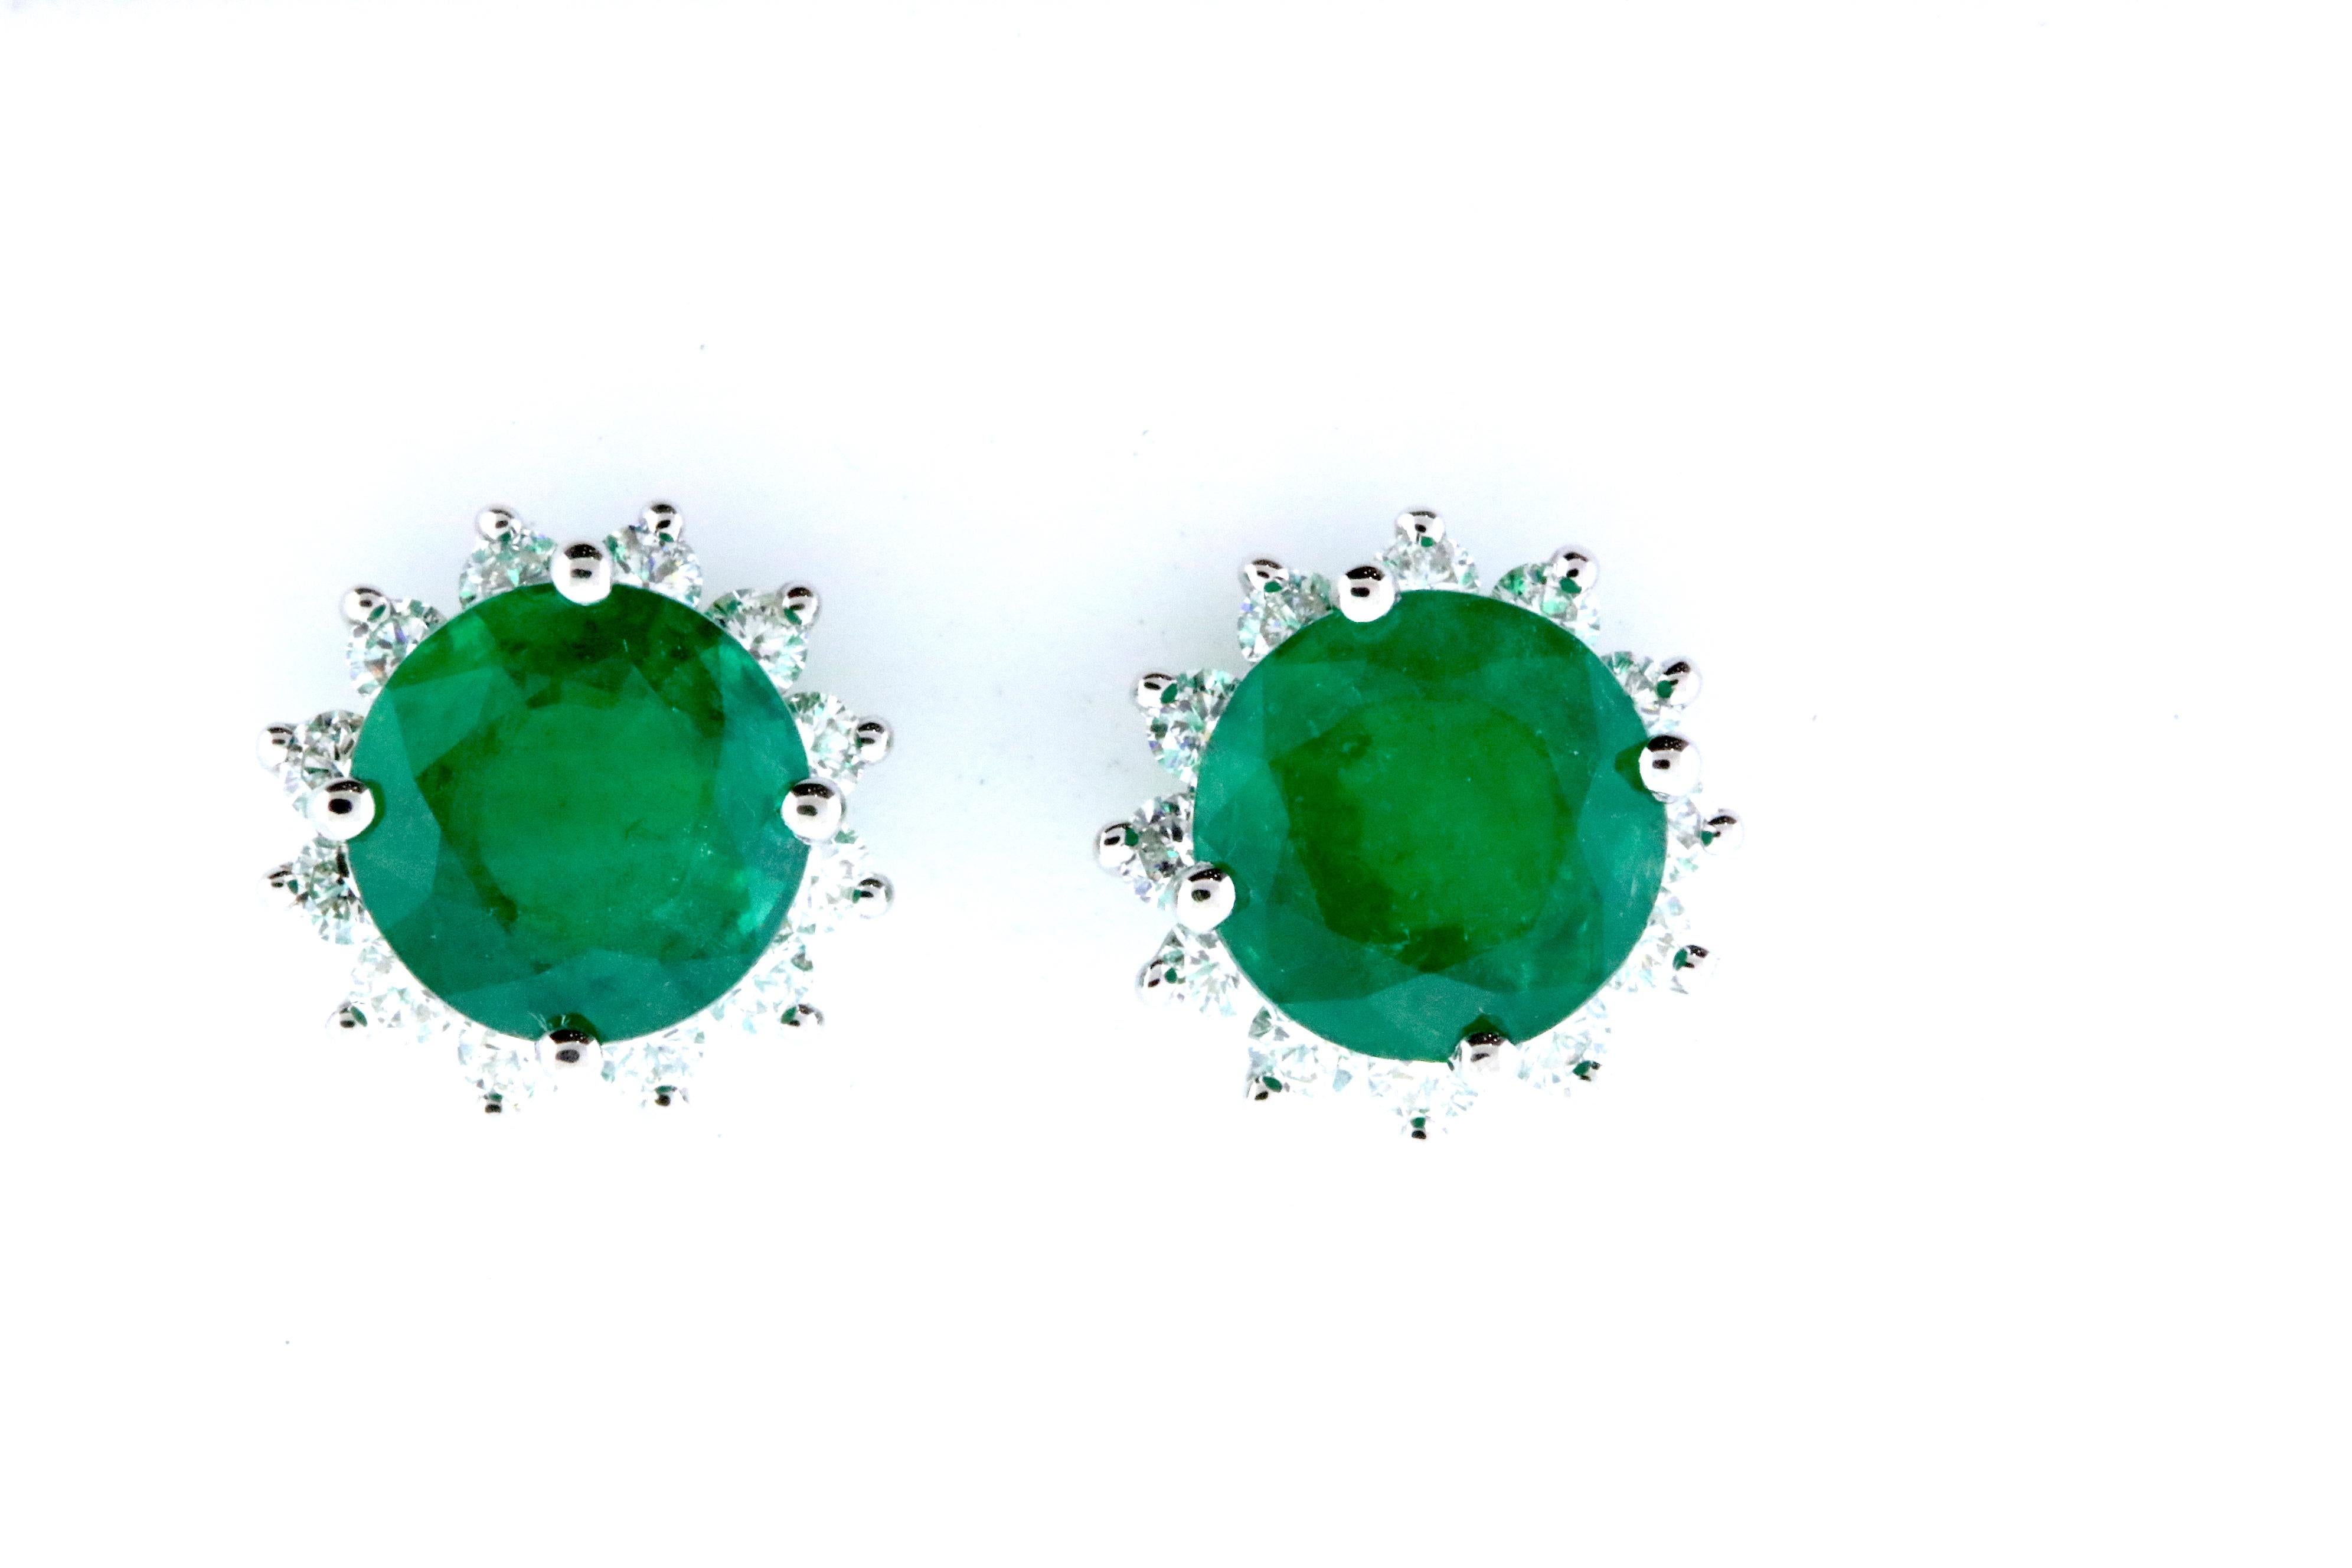 It doesn't get more elegant than round cut Emeralds with a halo of White Diamonds on the lobe! We were so excited to find a pair of Emeralds so perfectly matched in quality, color, and size, we just had to turn them into earrings!

Material: 14k